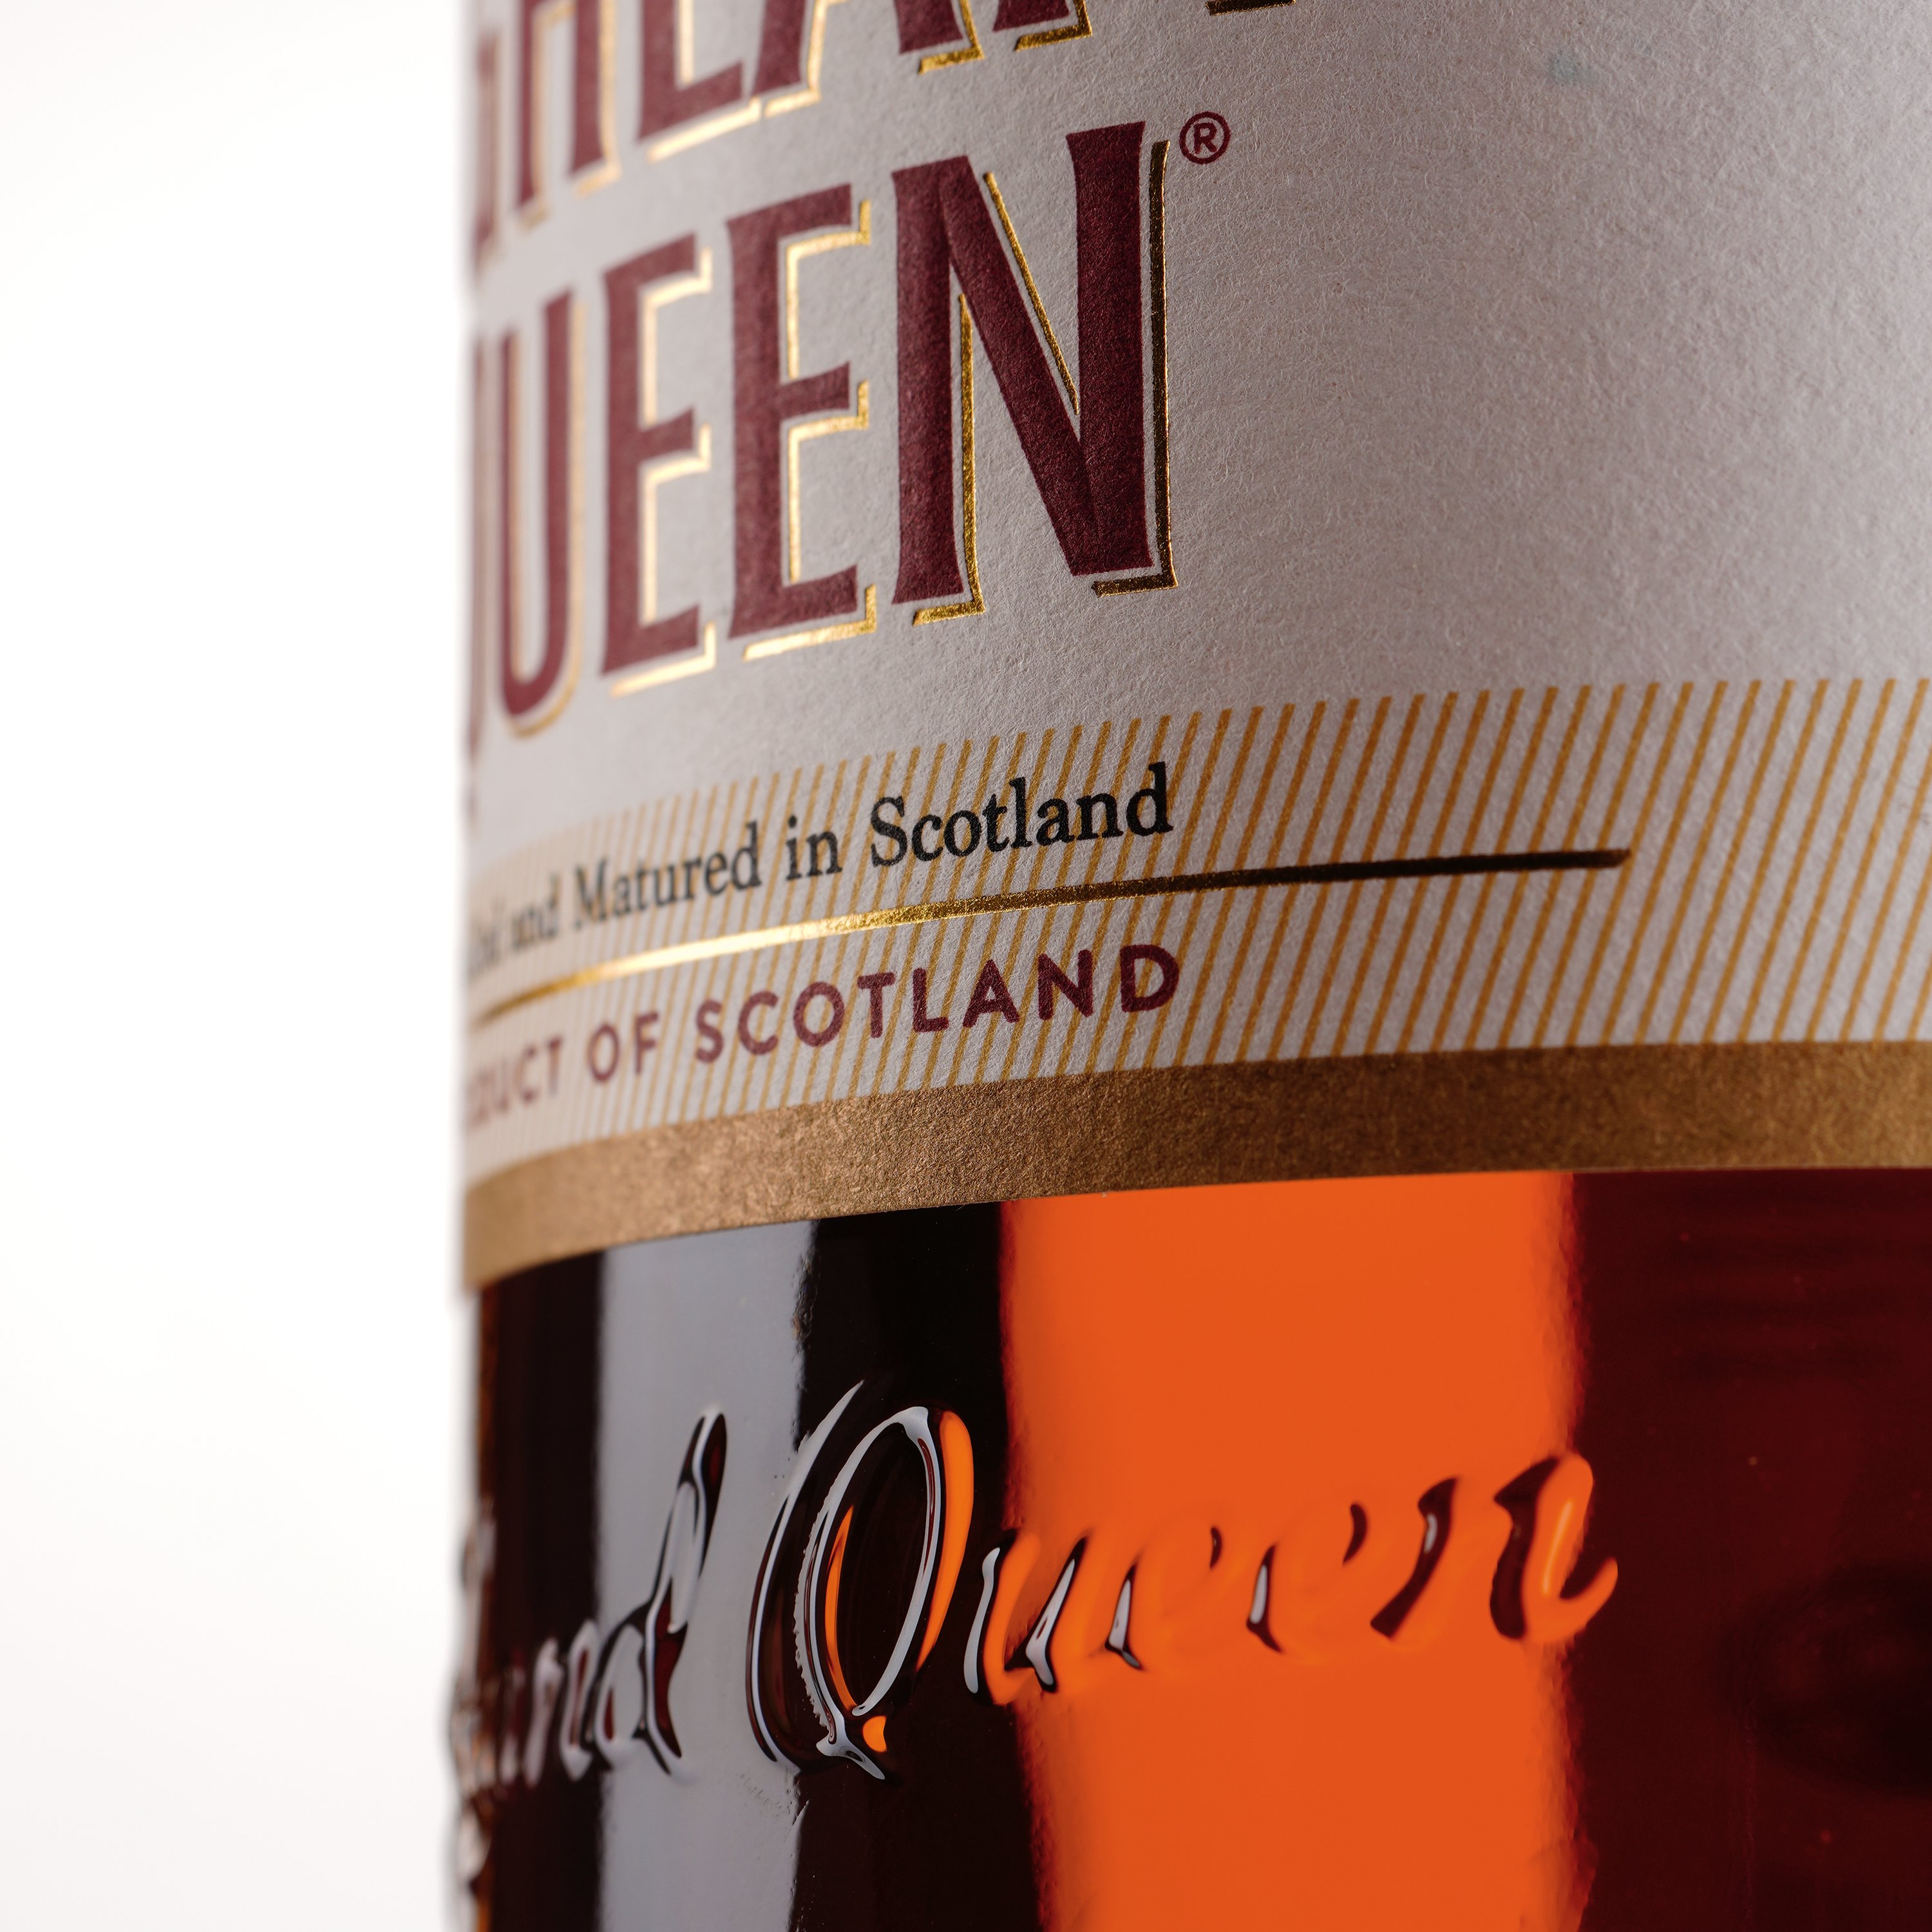 Виски Highland Queen Blended Scotch Whisky, 40%, 0,7 л (12063) - фото 3